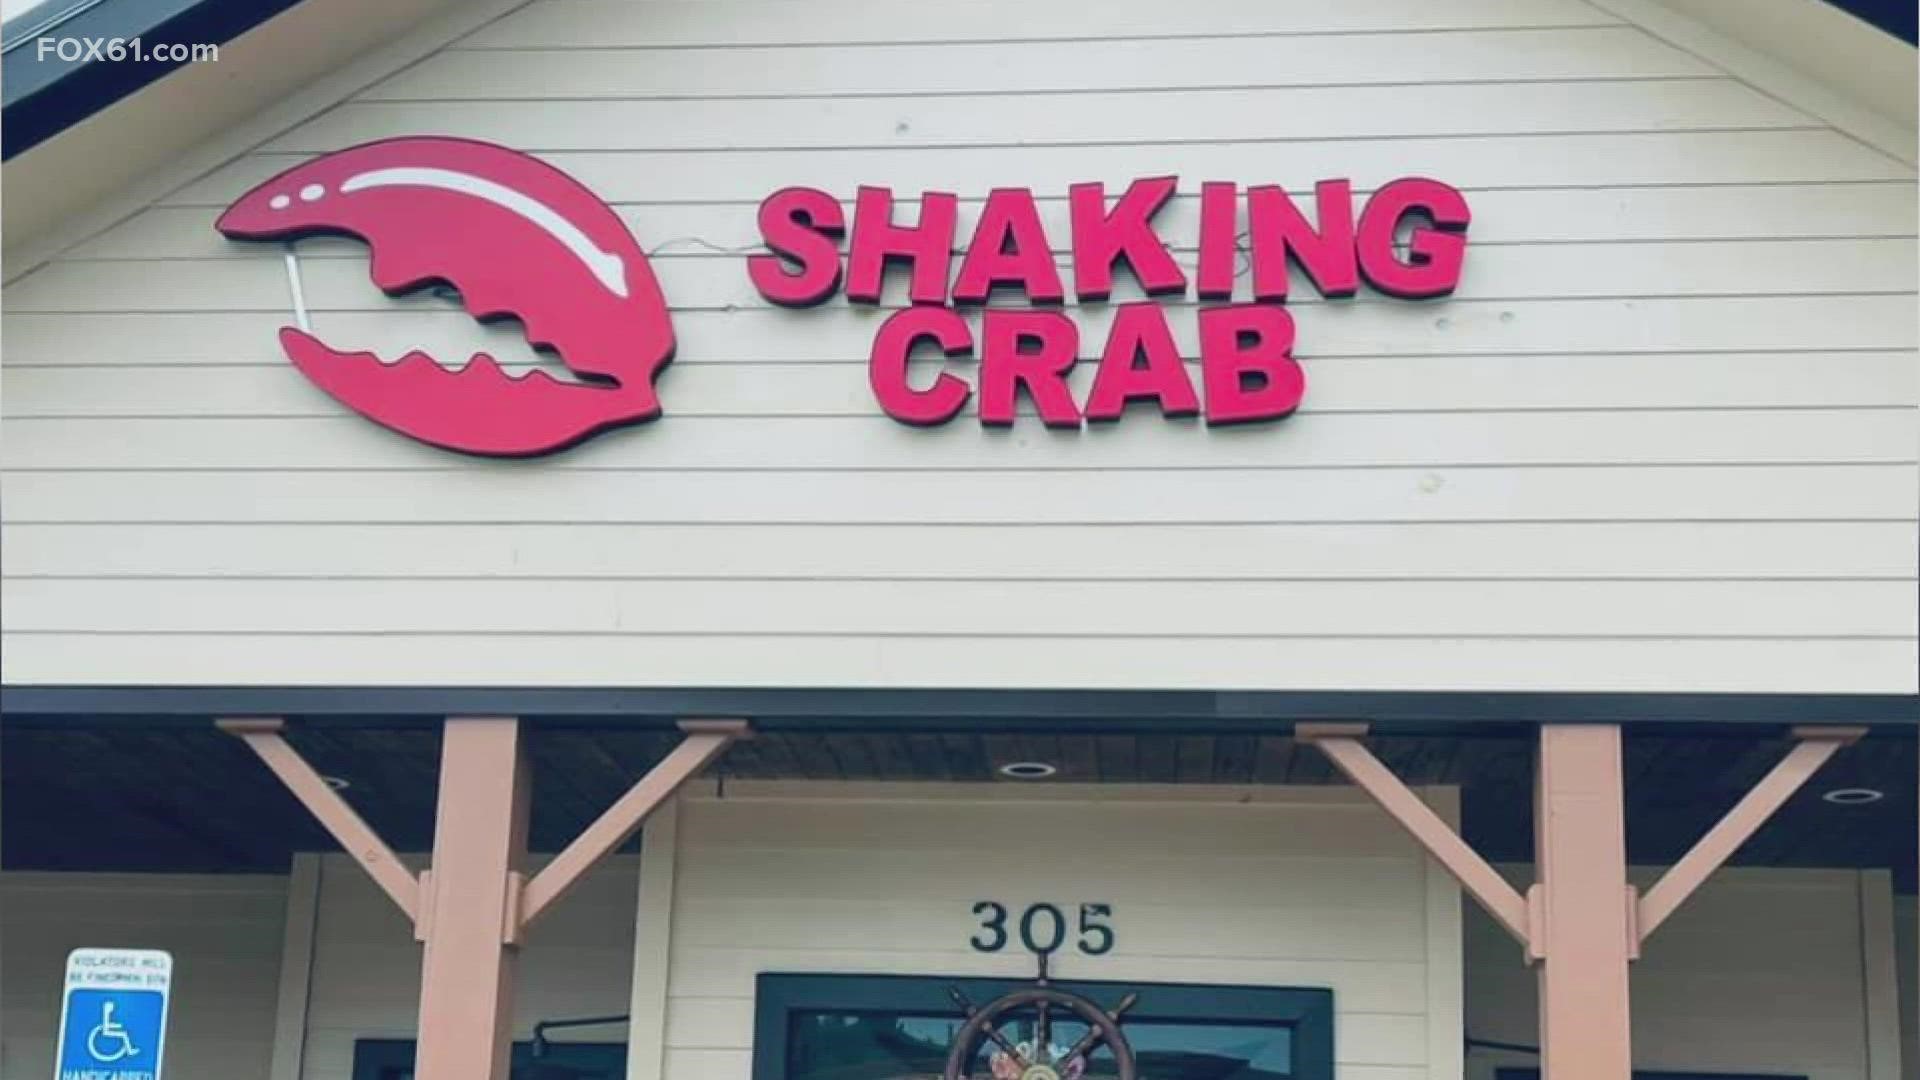 Shaking Crab in New London is taking an unorthodox approach to addressing staff shortages: robot servers to serve meals.